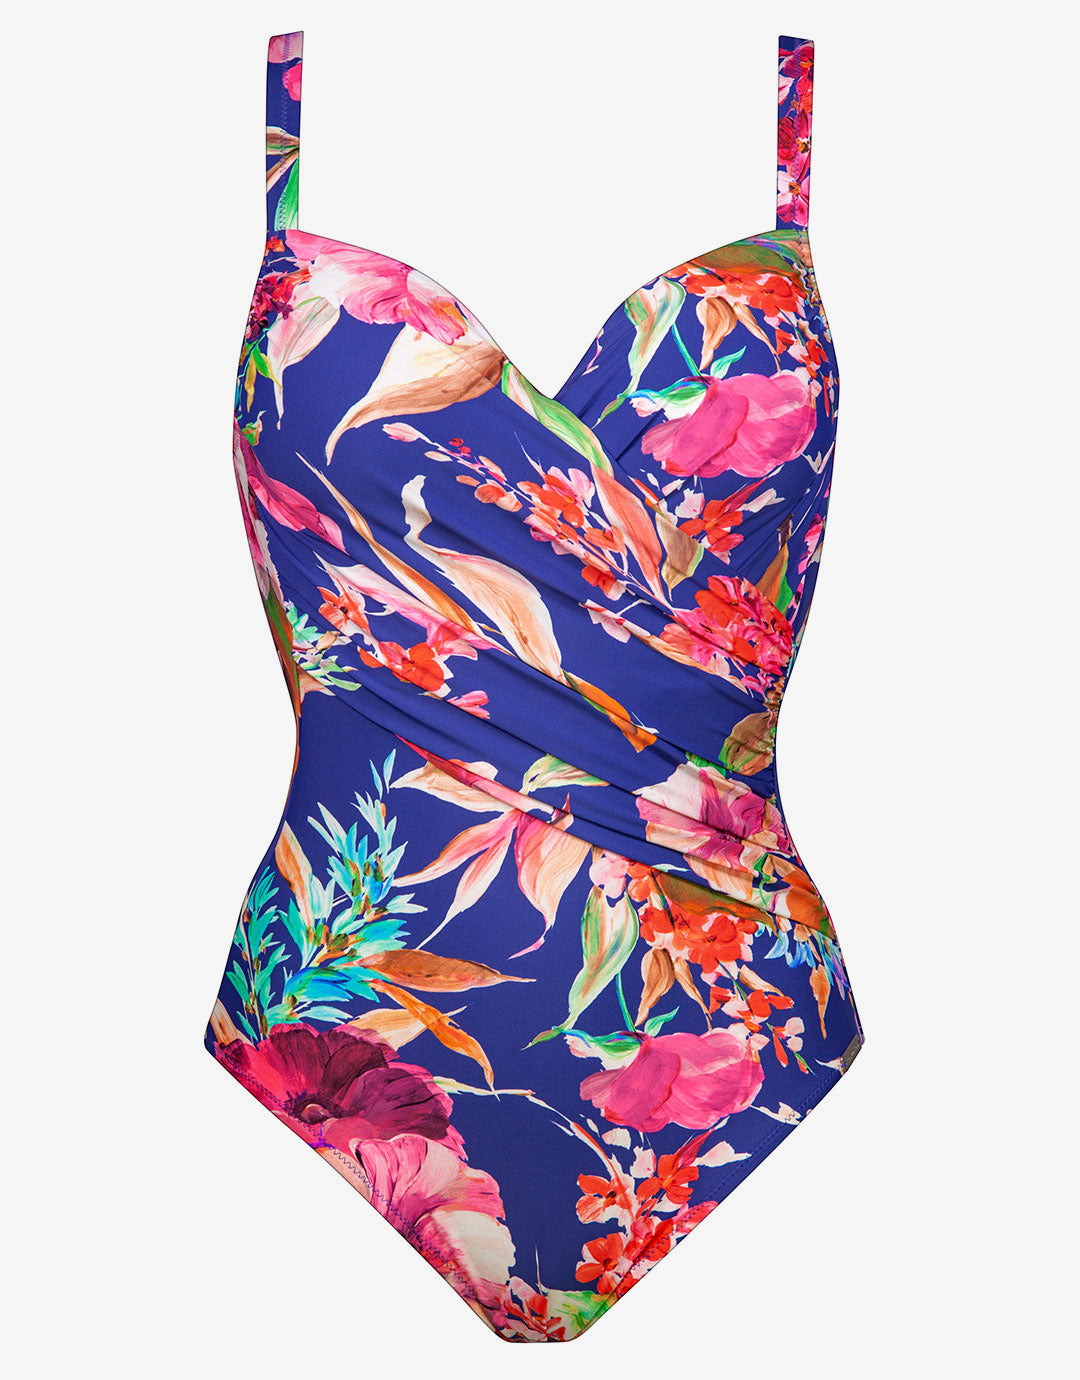 Spring Invite Underwired Swimsuit - Lilac Flowers - Simply Beach UK